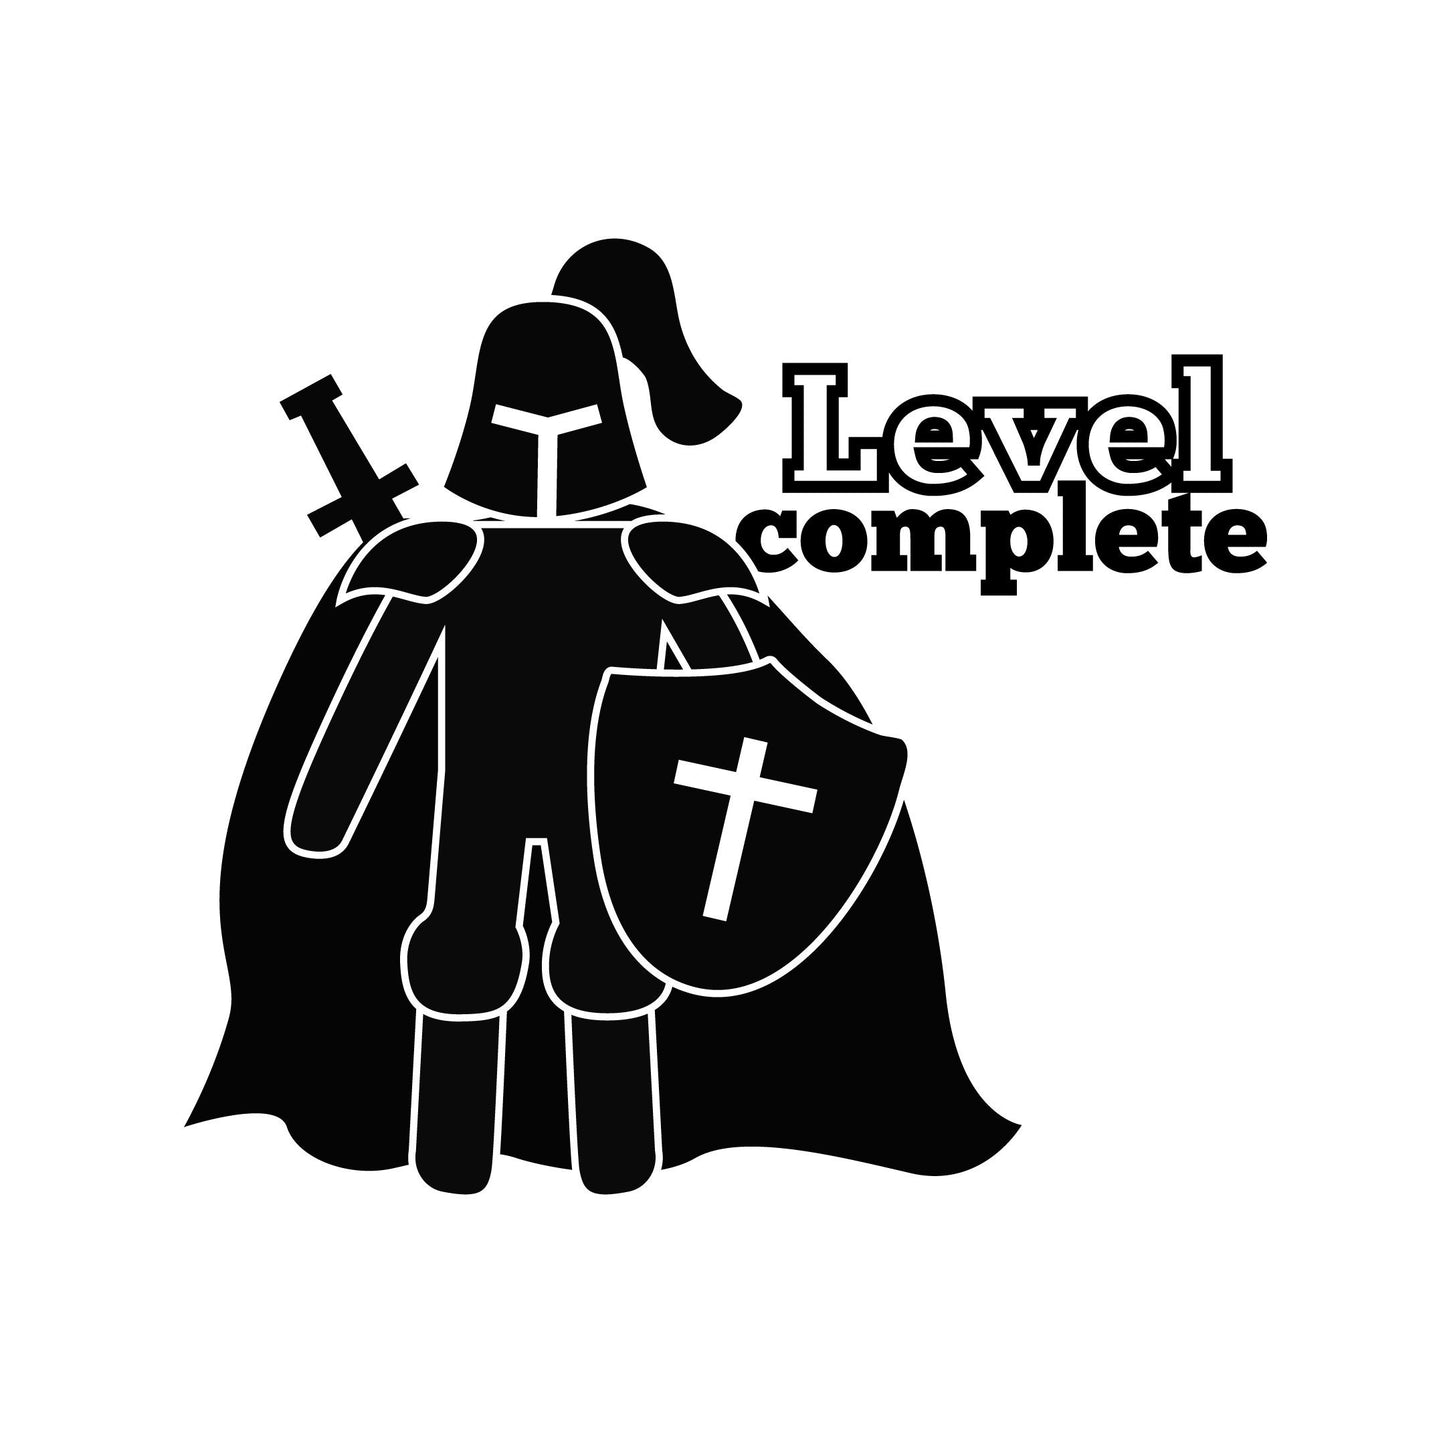 MMORPG Level Complete Vinyl Wall Sticker -RPG  Decal for Gamers Teens - Wall Sticker for Room Decor